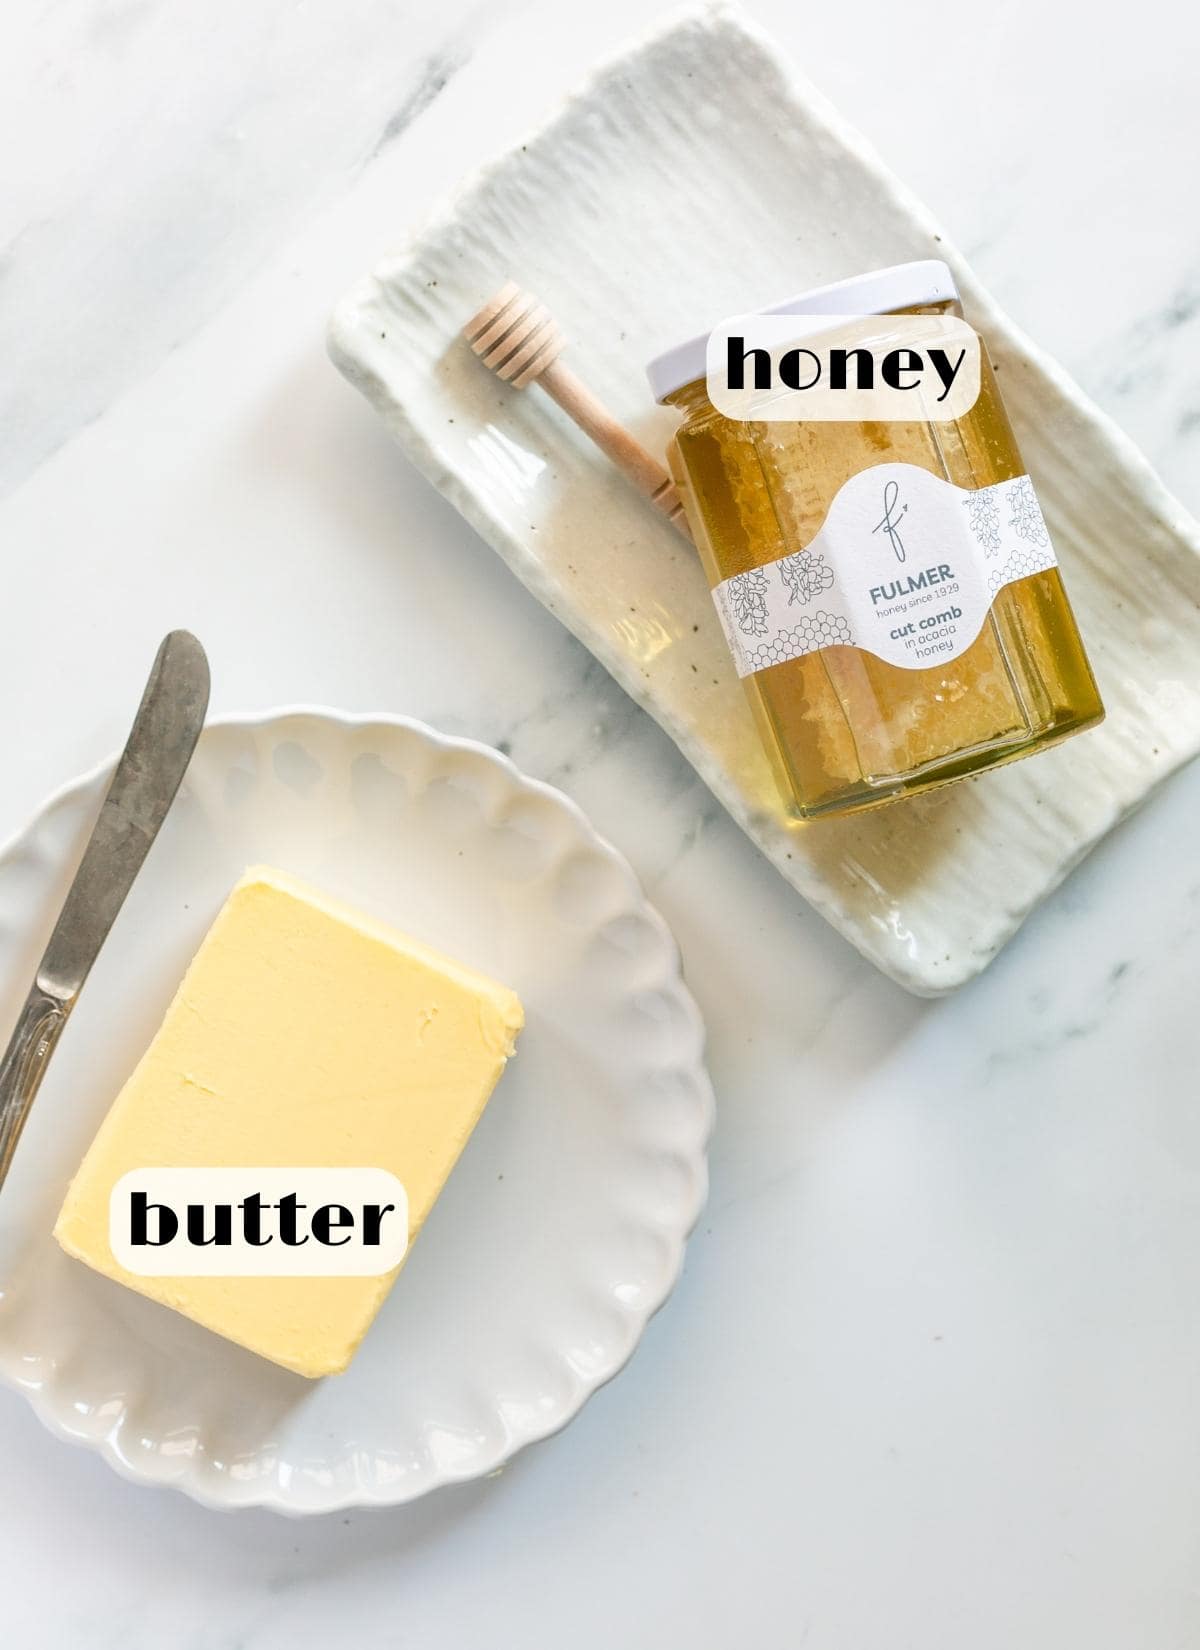 honey butter ingredients: honey and butter.